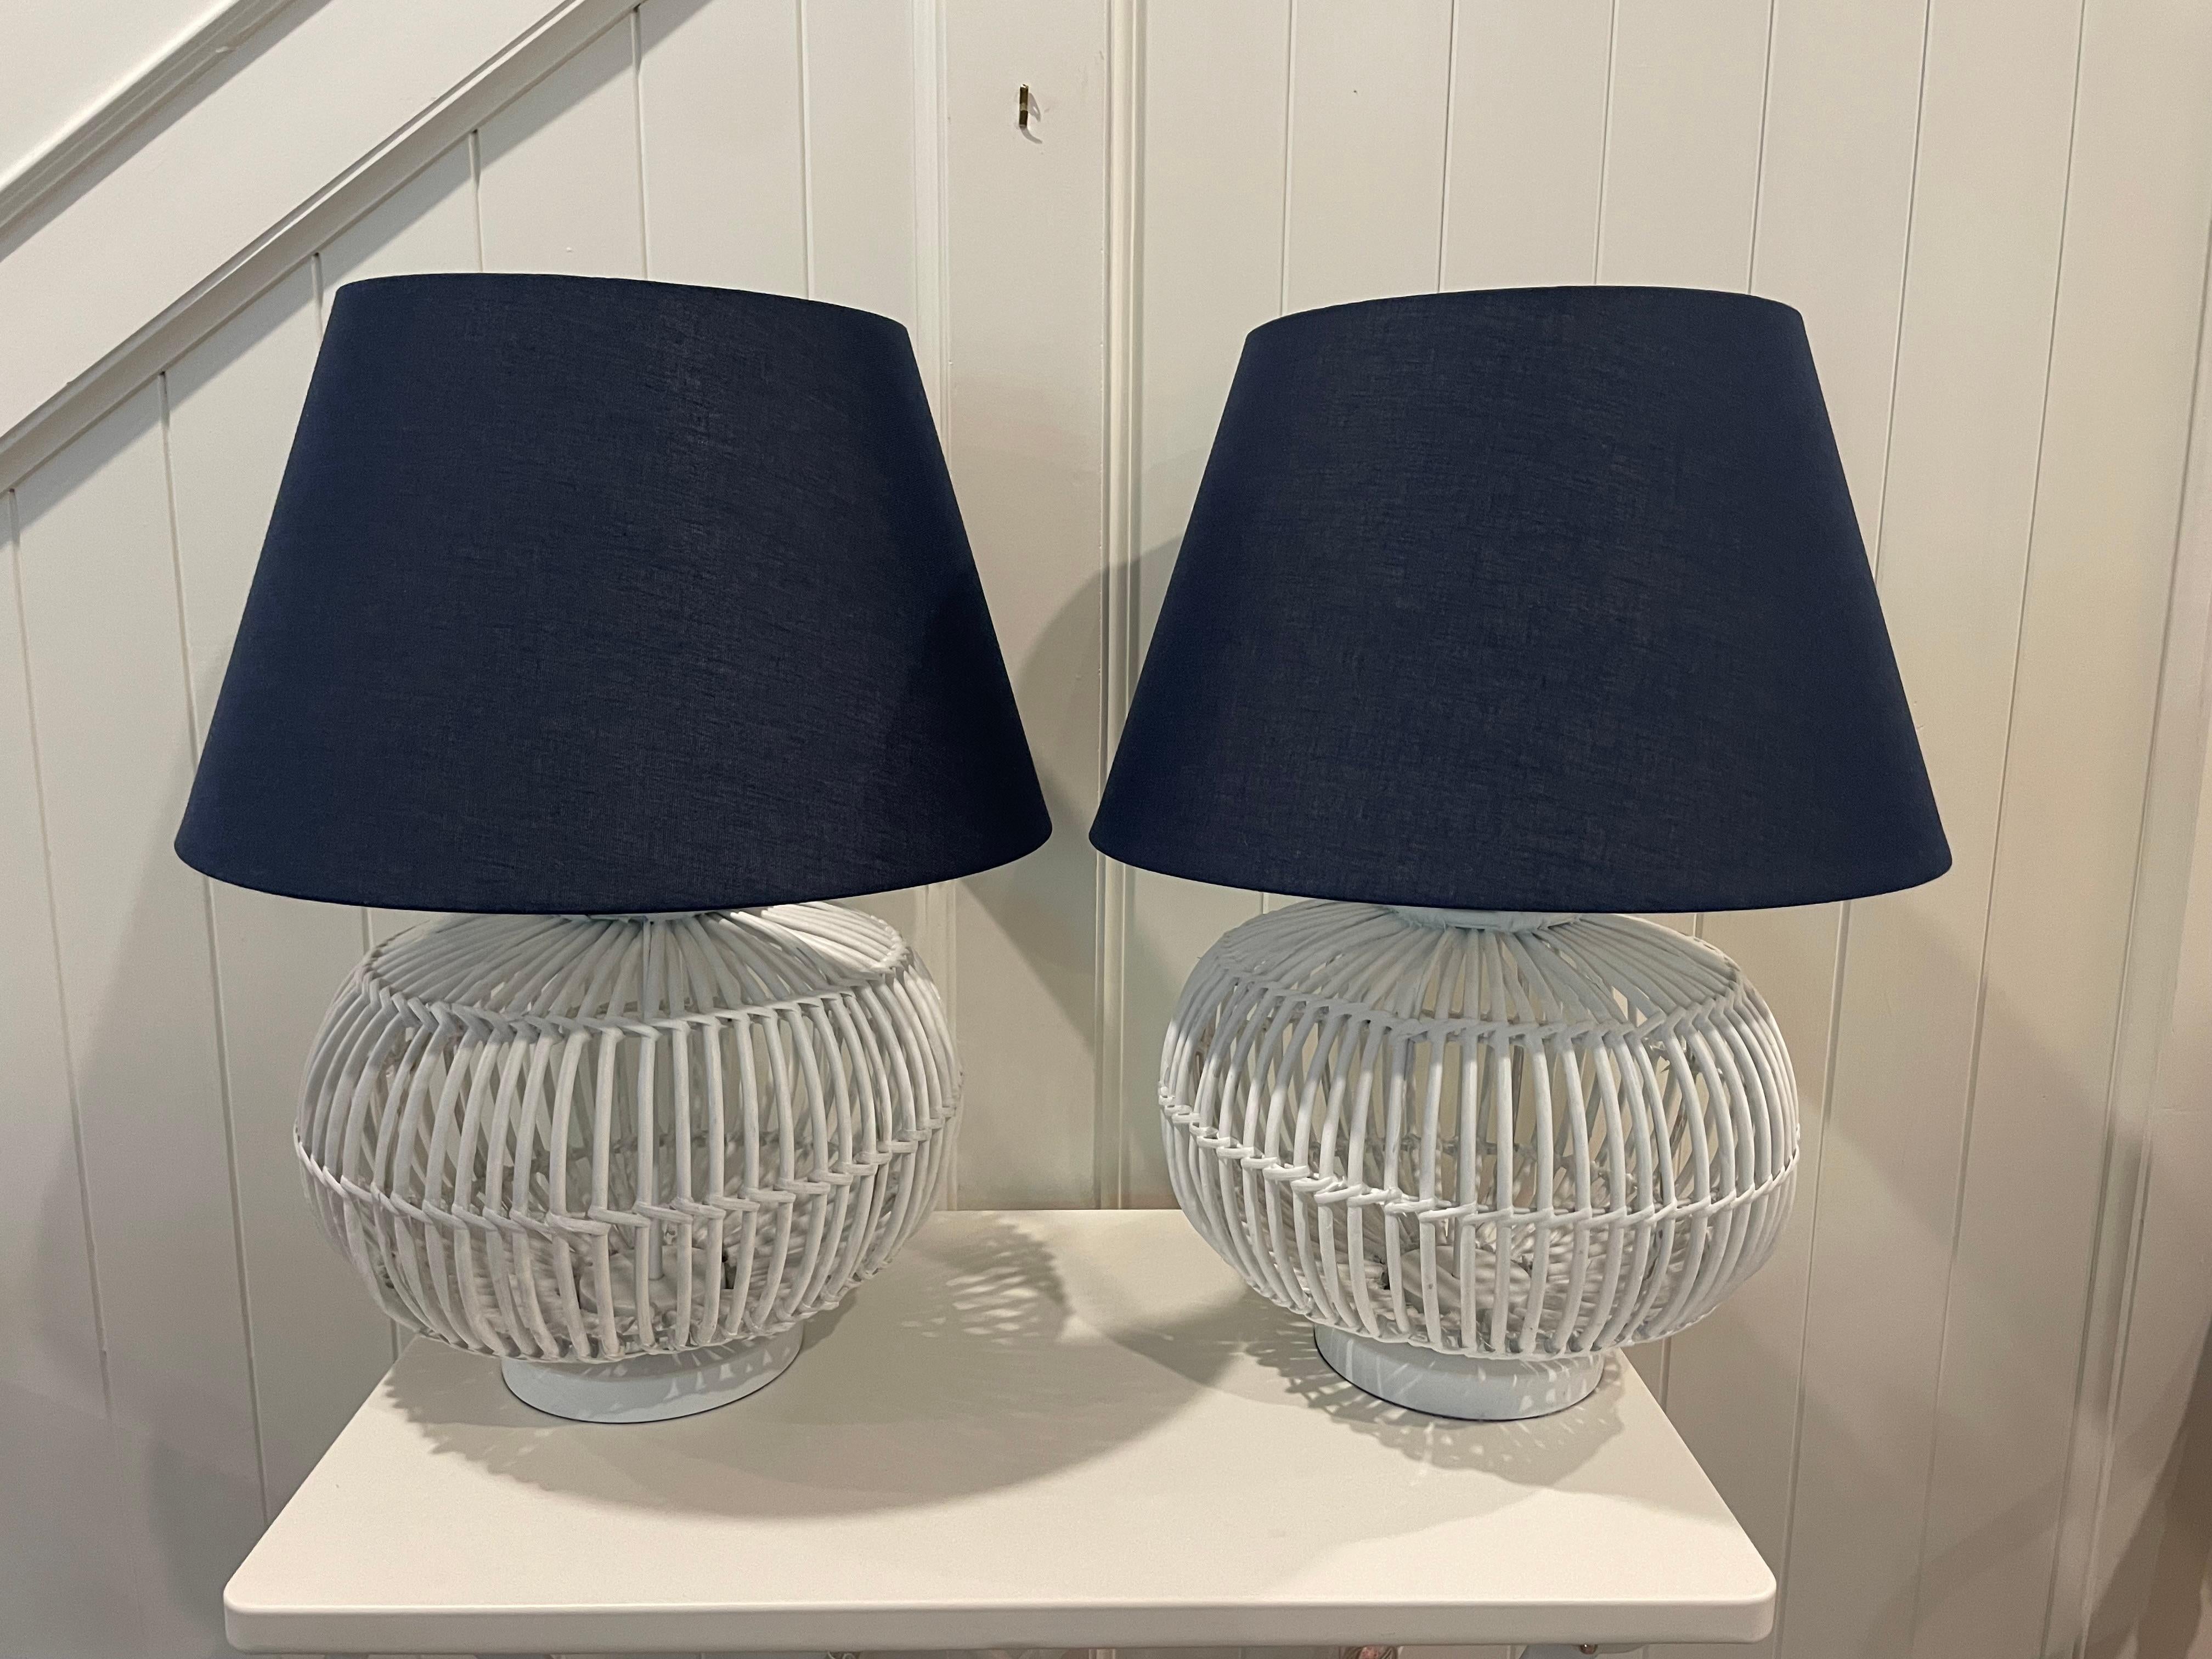 Lauren Ralph Lauren White Rattan Table Lamps With Navy Shades - a Pair In Excellent Condition For Sale In Cookeville, TN